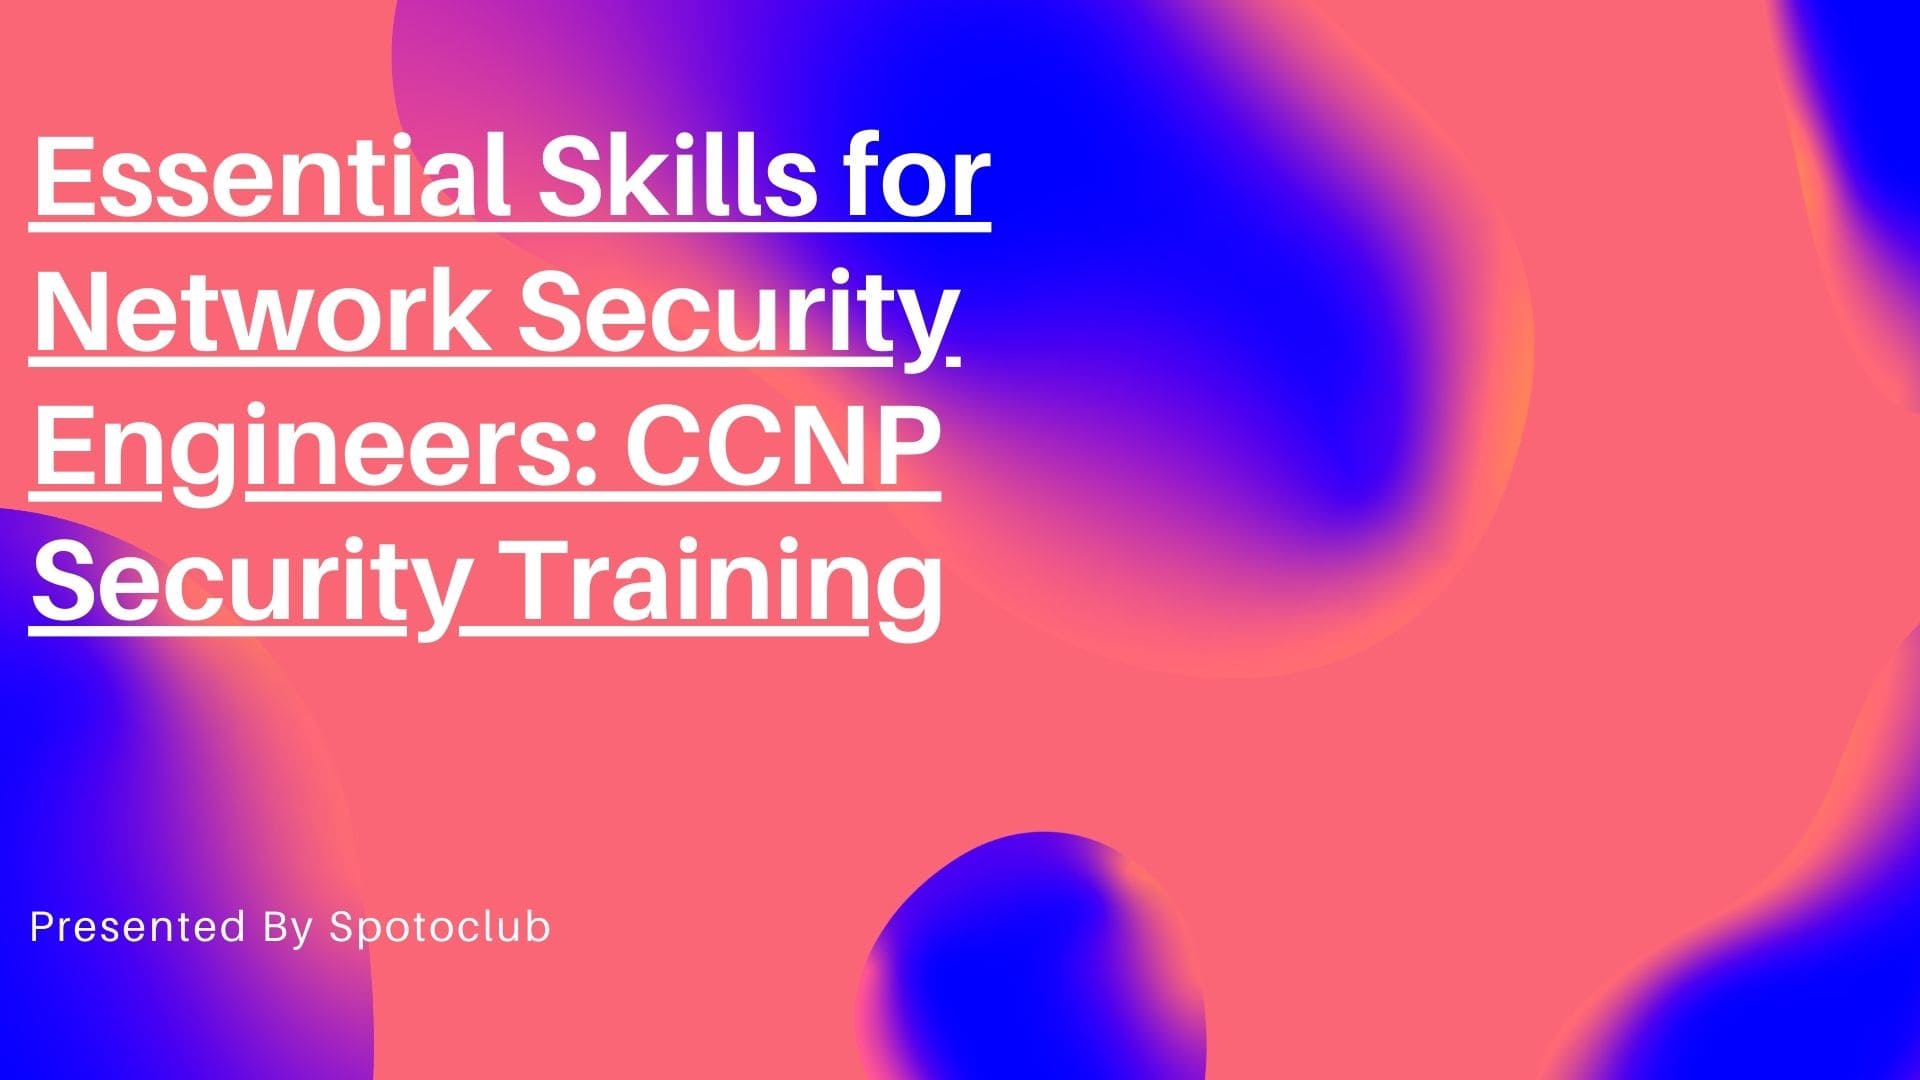 CCNP Security Training